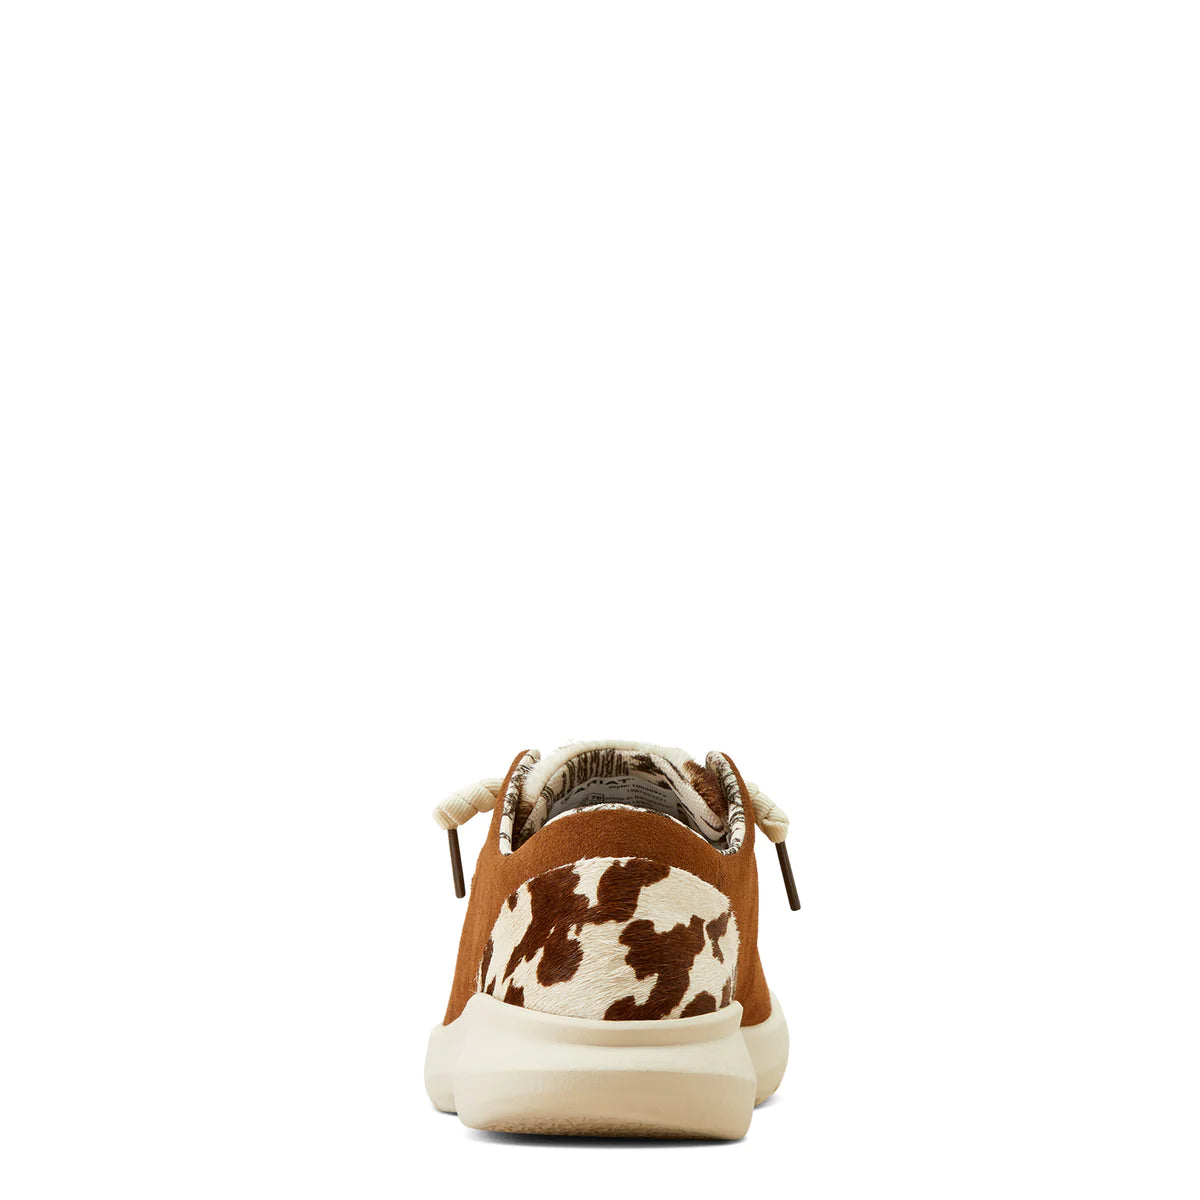 Ariat Wmns Hilo Ginger Suede/Cow Hair On